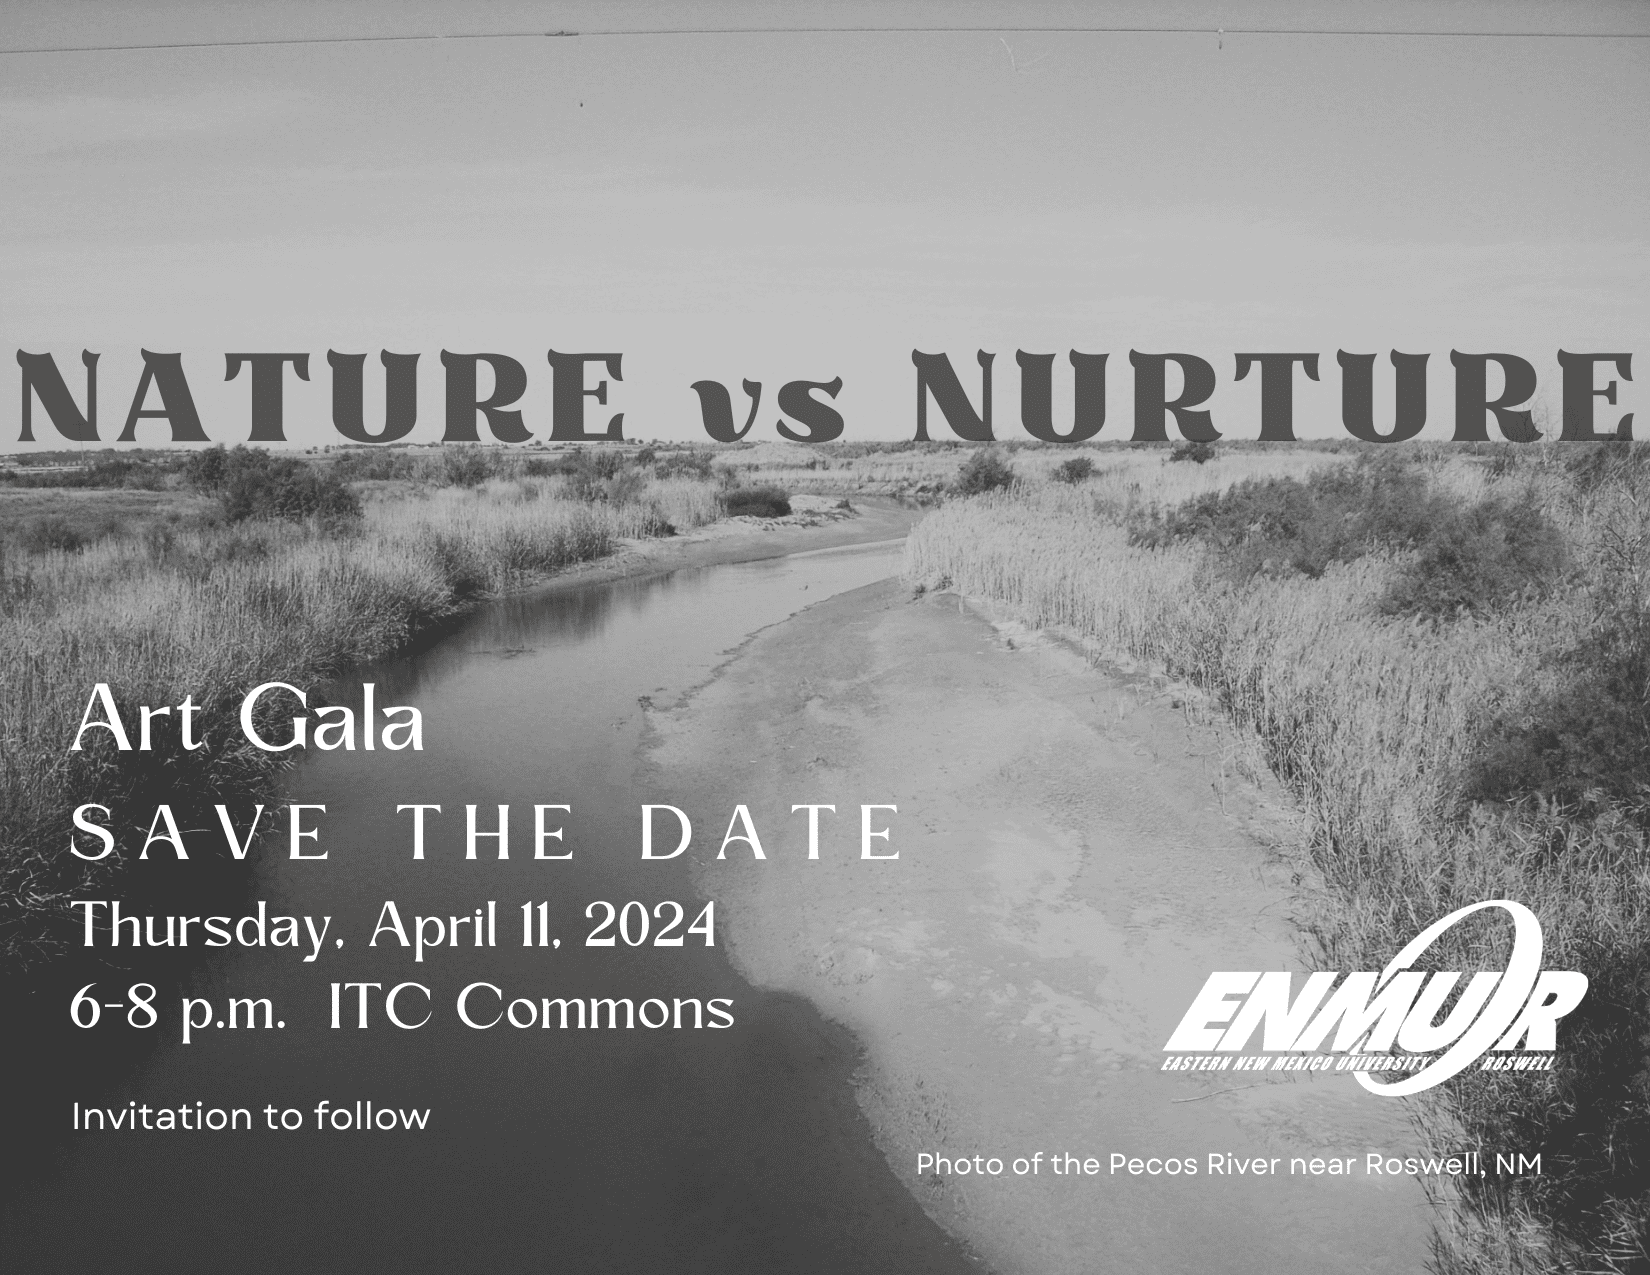 Art Gala 2024; Nature vs Nurture. Join us on Thursday, April 11, 2024 in the ITC Commons between 6:00 PM and 8:00 PM.